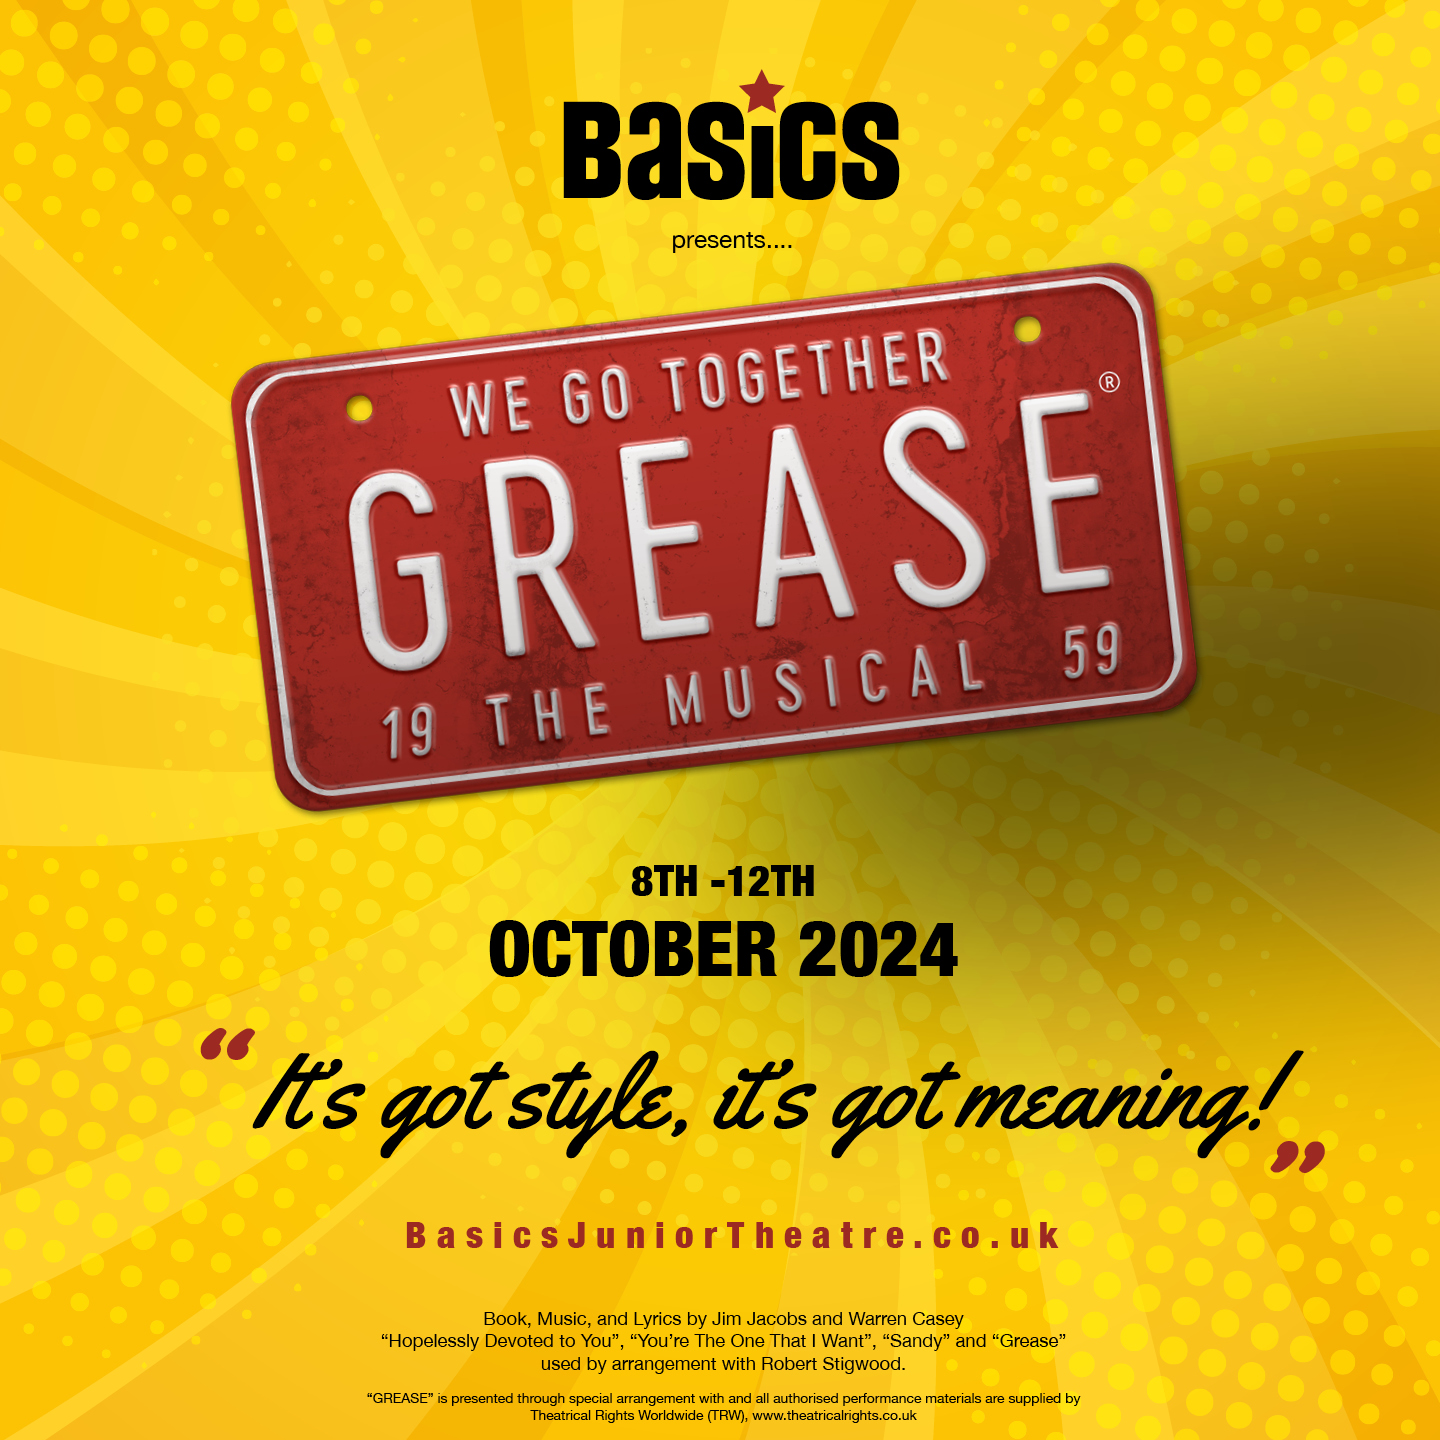 Grease PendleHippodrome TicketSource Event Graphic 1080x1080